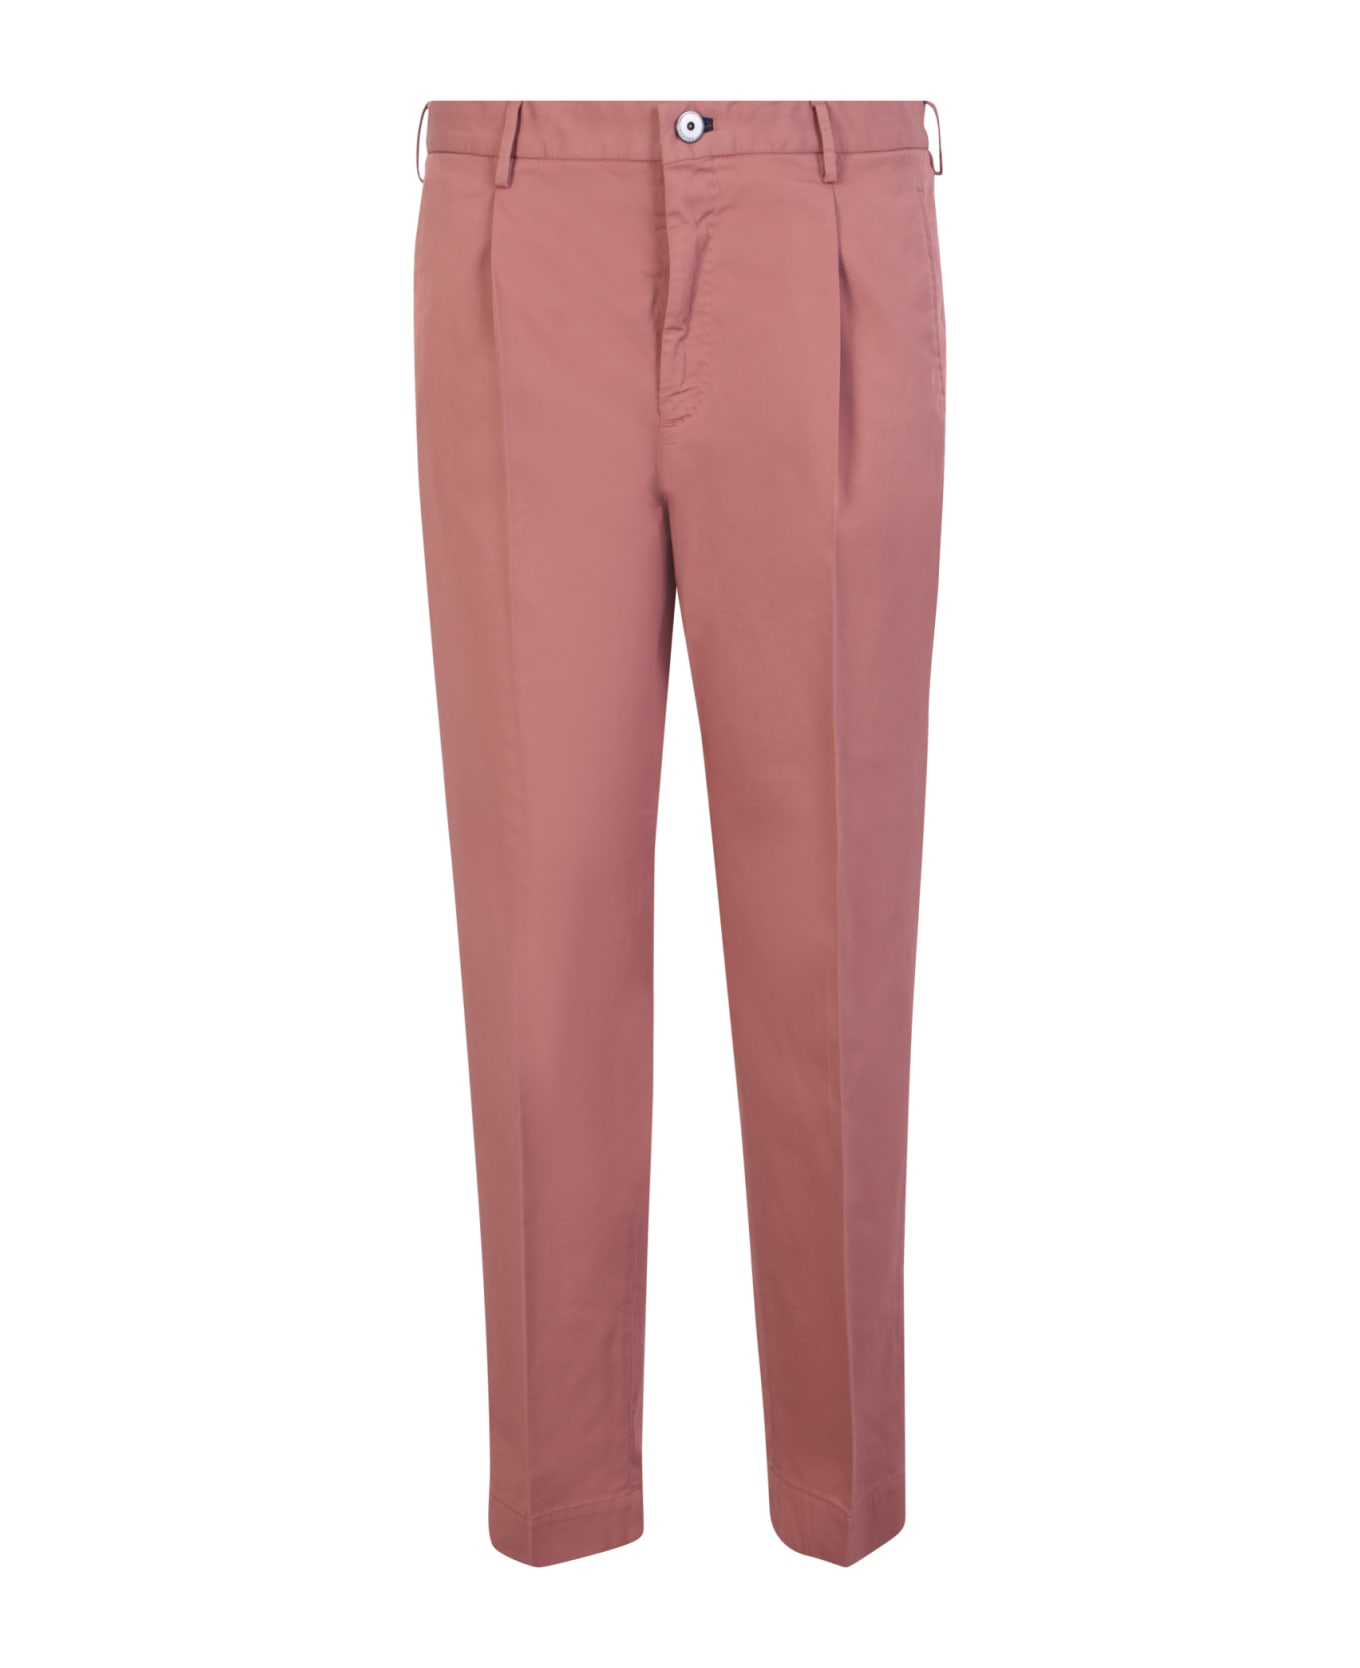 Incotex Antique Pink Trousers - Pink